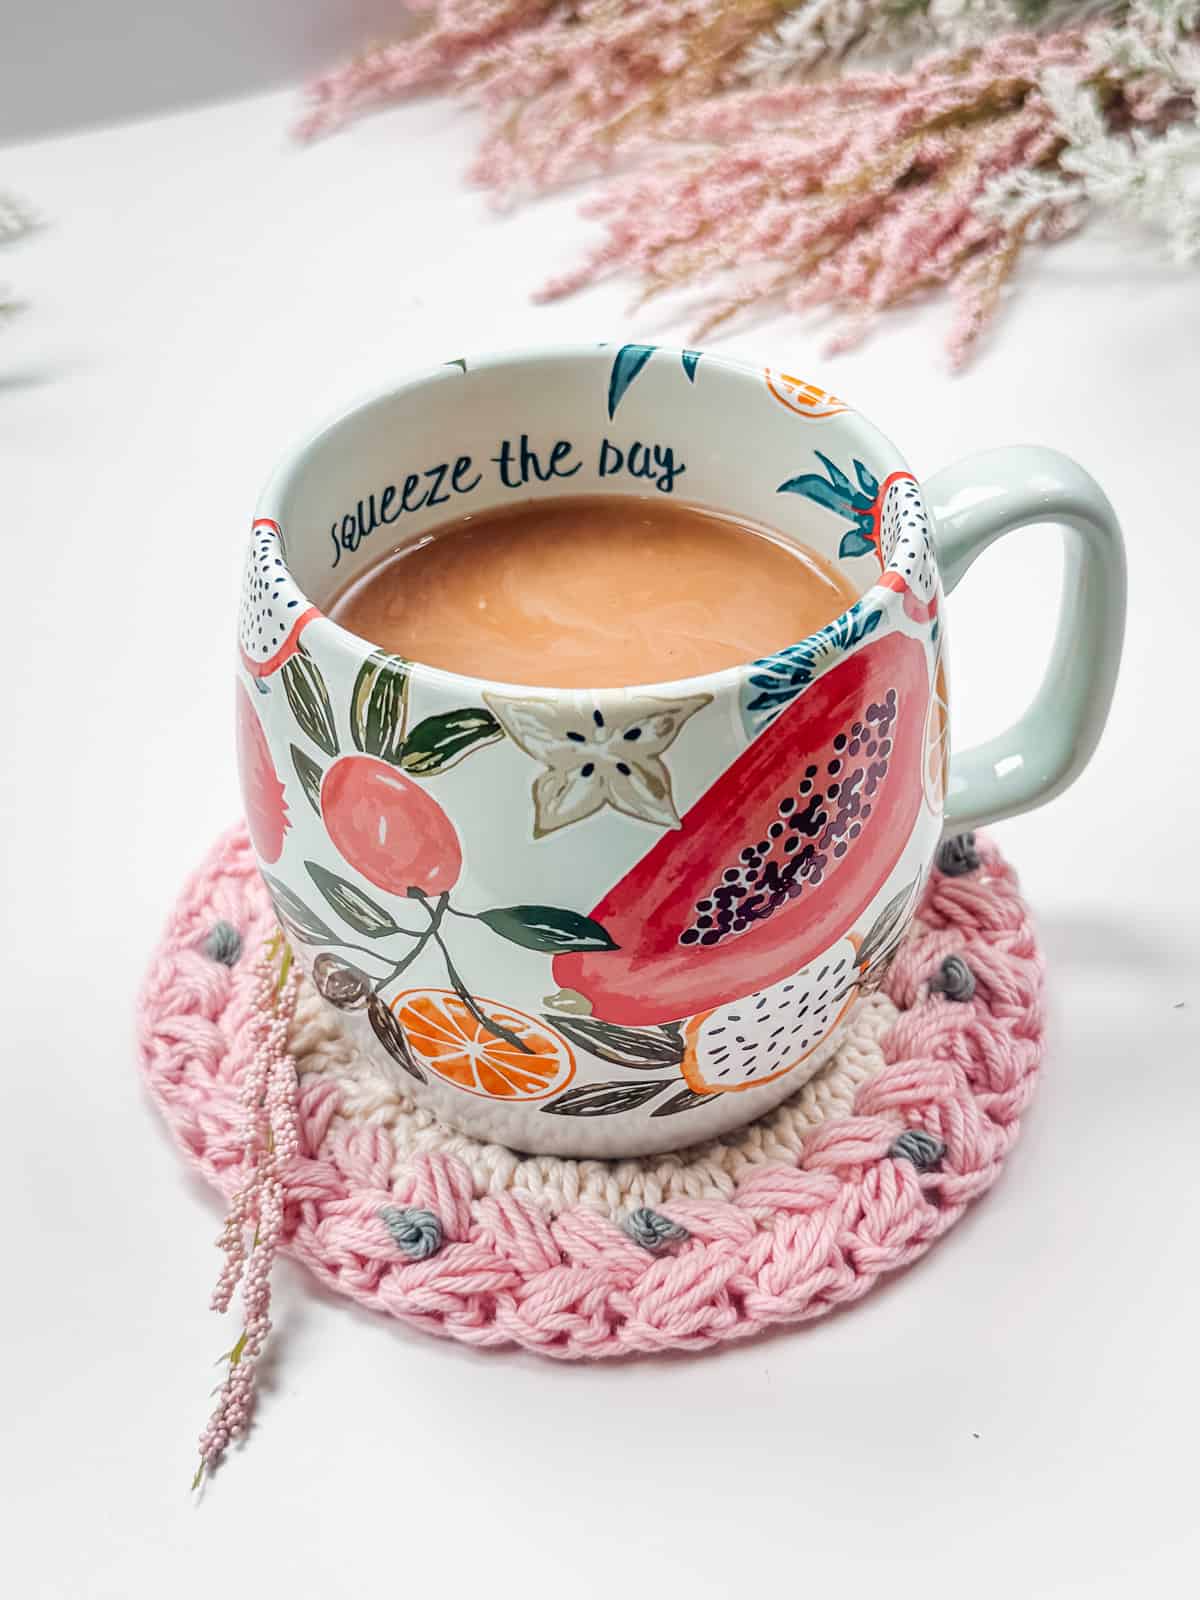 A cup of coffee is sitting on a crocheted coaster.